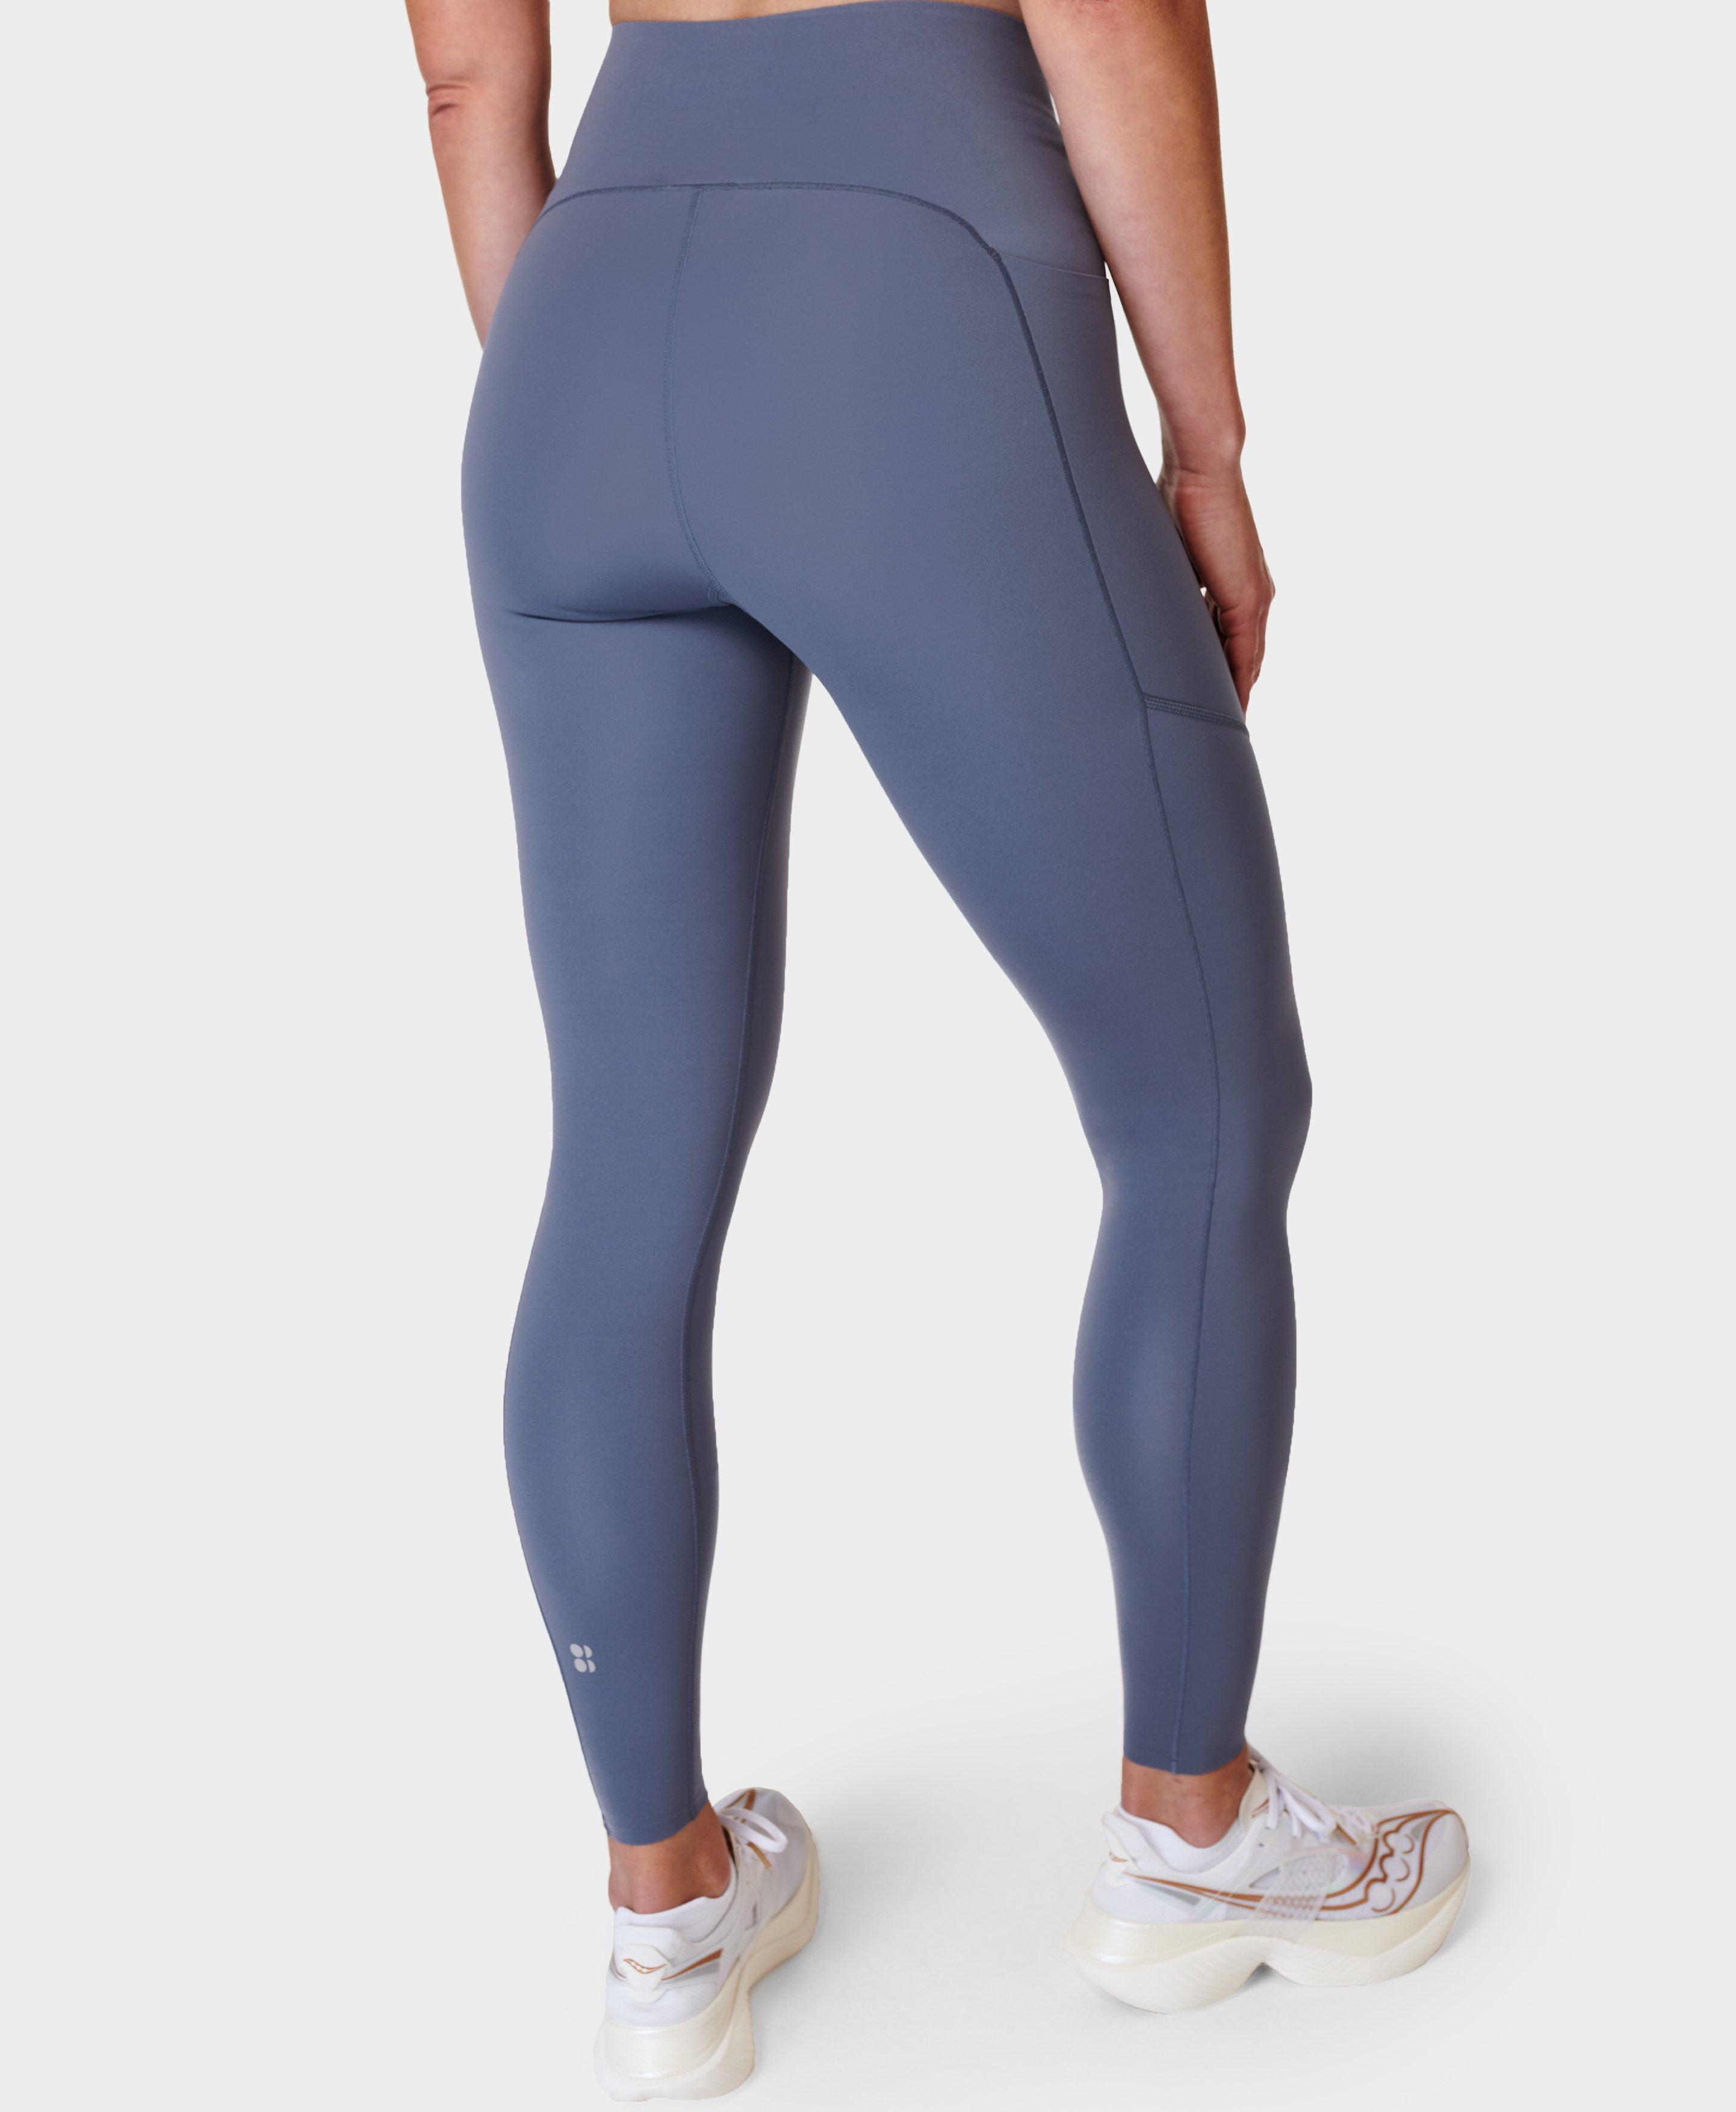 Flawless Fit Ultra Slimming Finish Strong Energie Leggings W